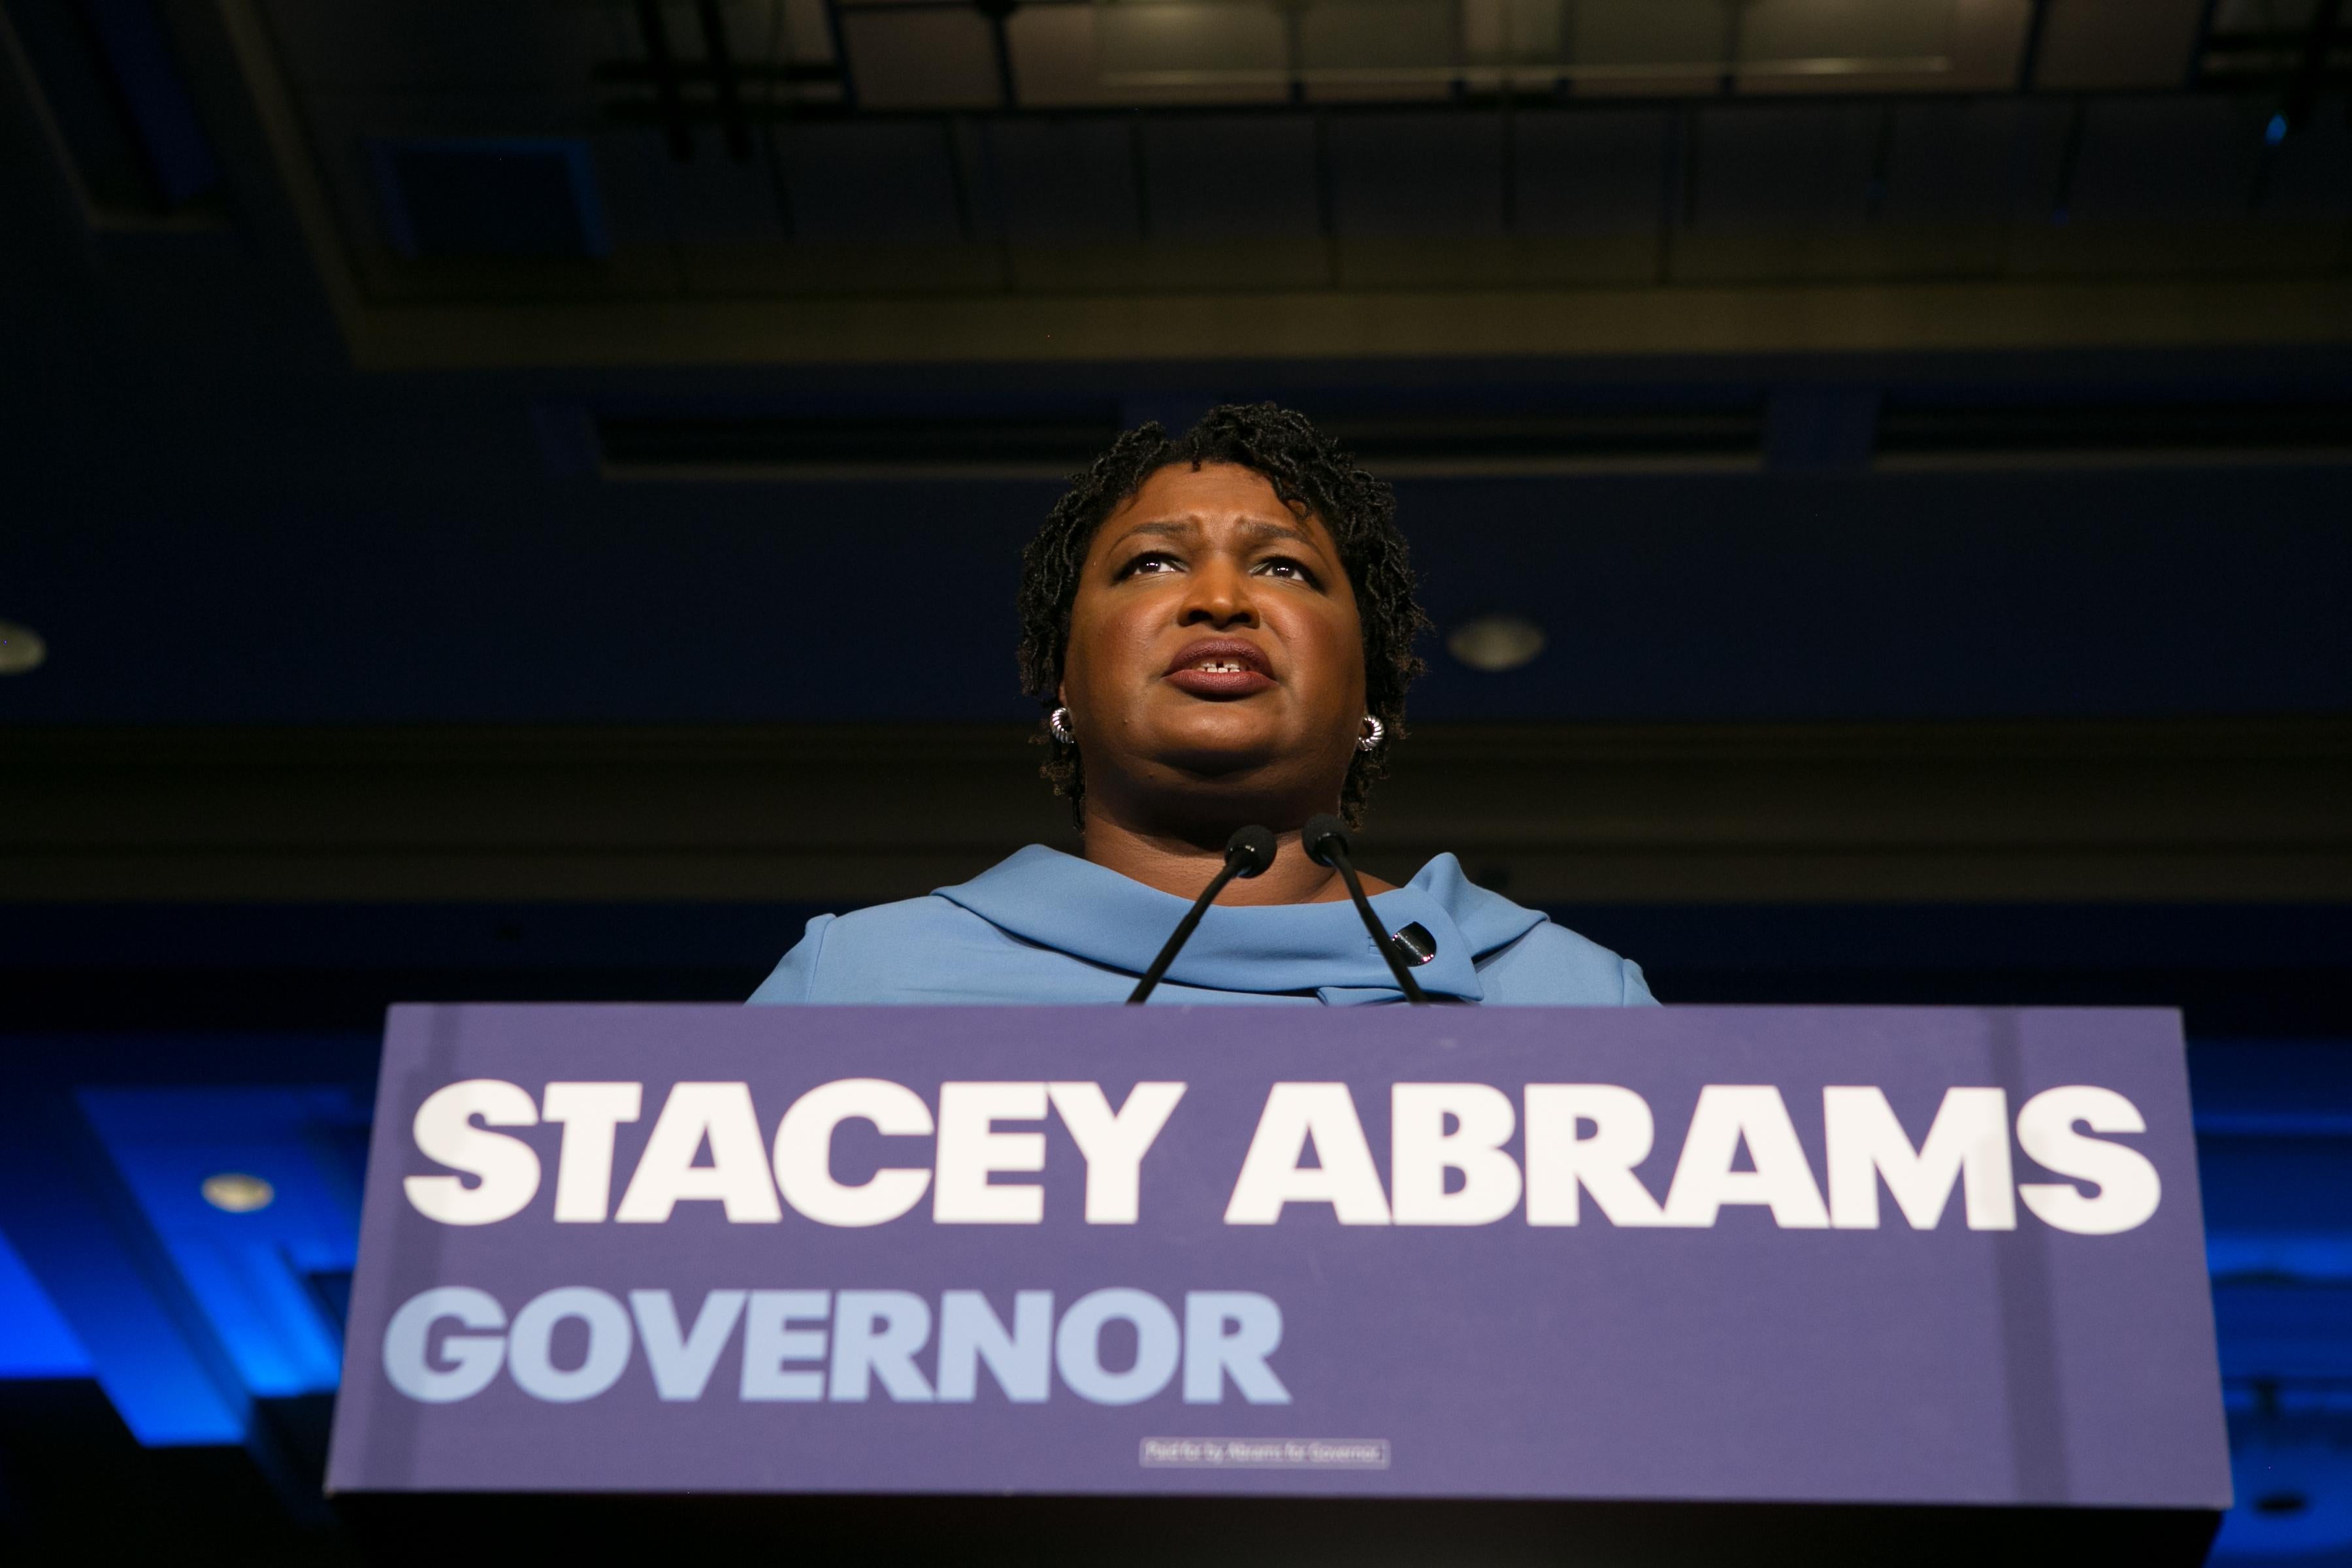 Stacey Abrams speaking behind a podium at an election event November 6.